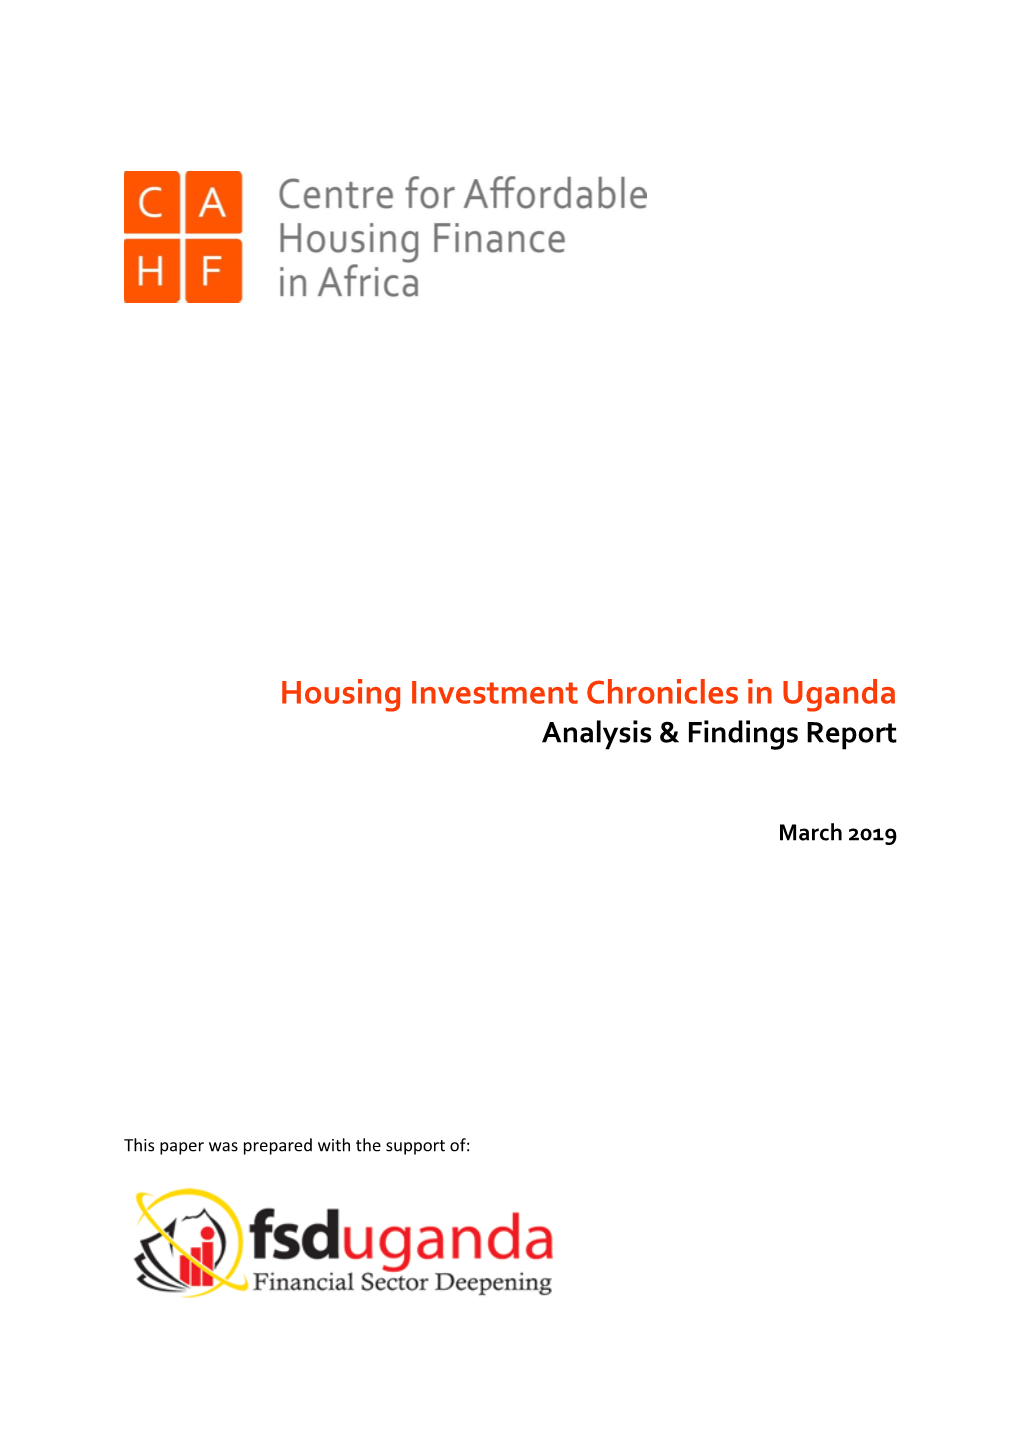 Housing Investment Chronicles in Uganda Analysis & Findings Report